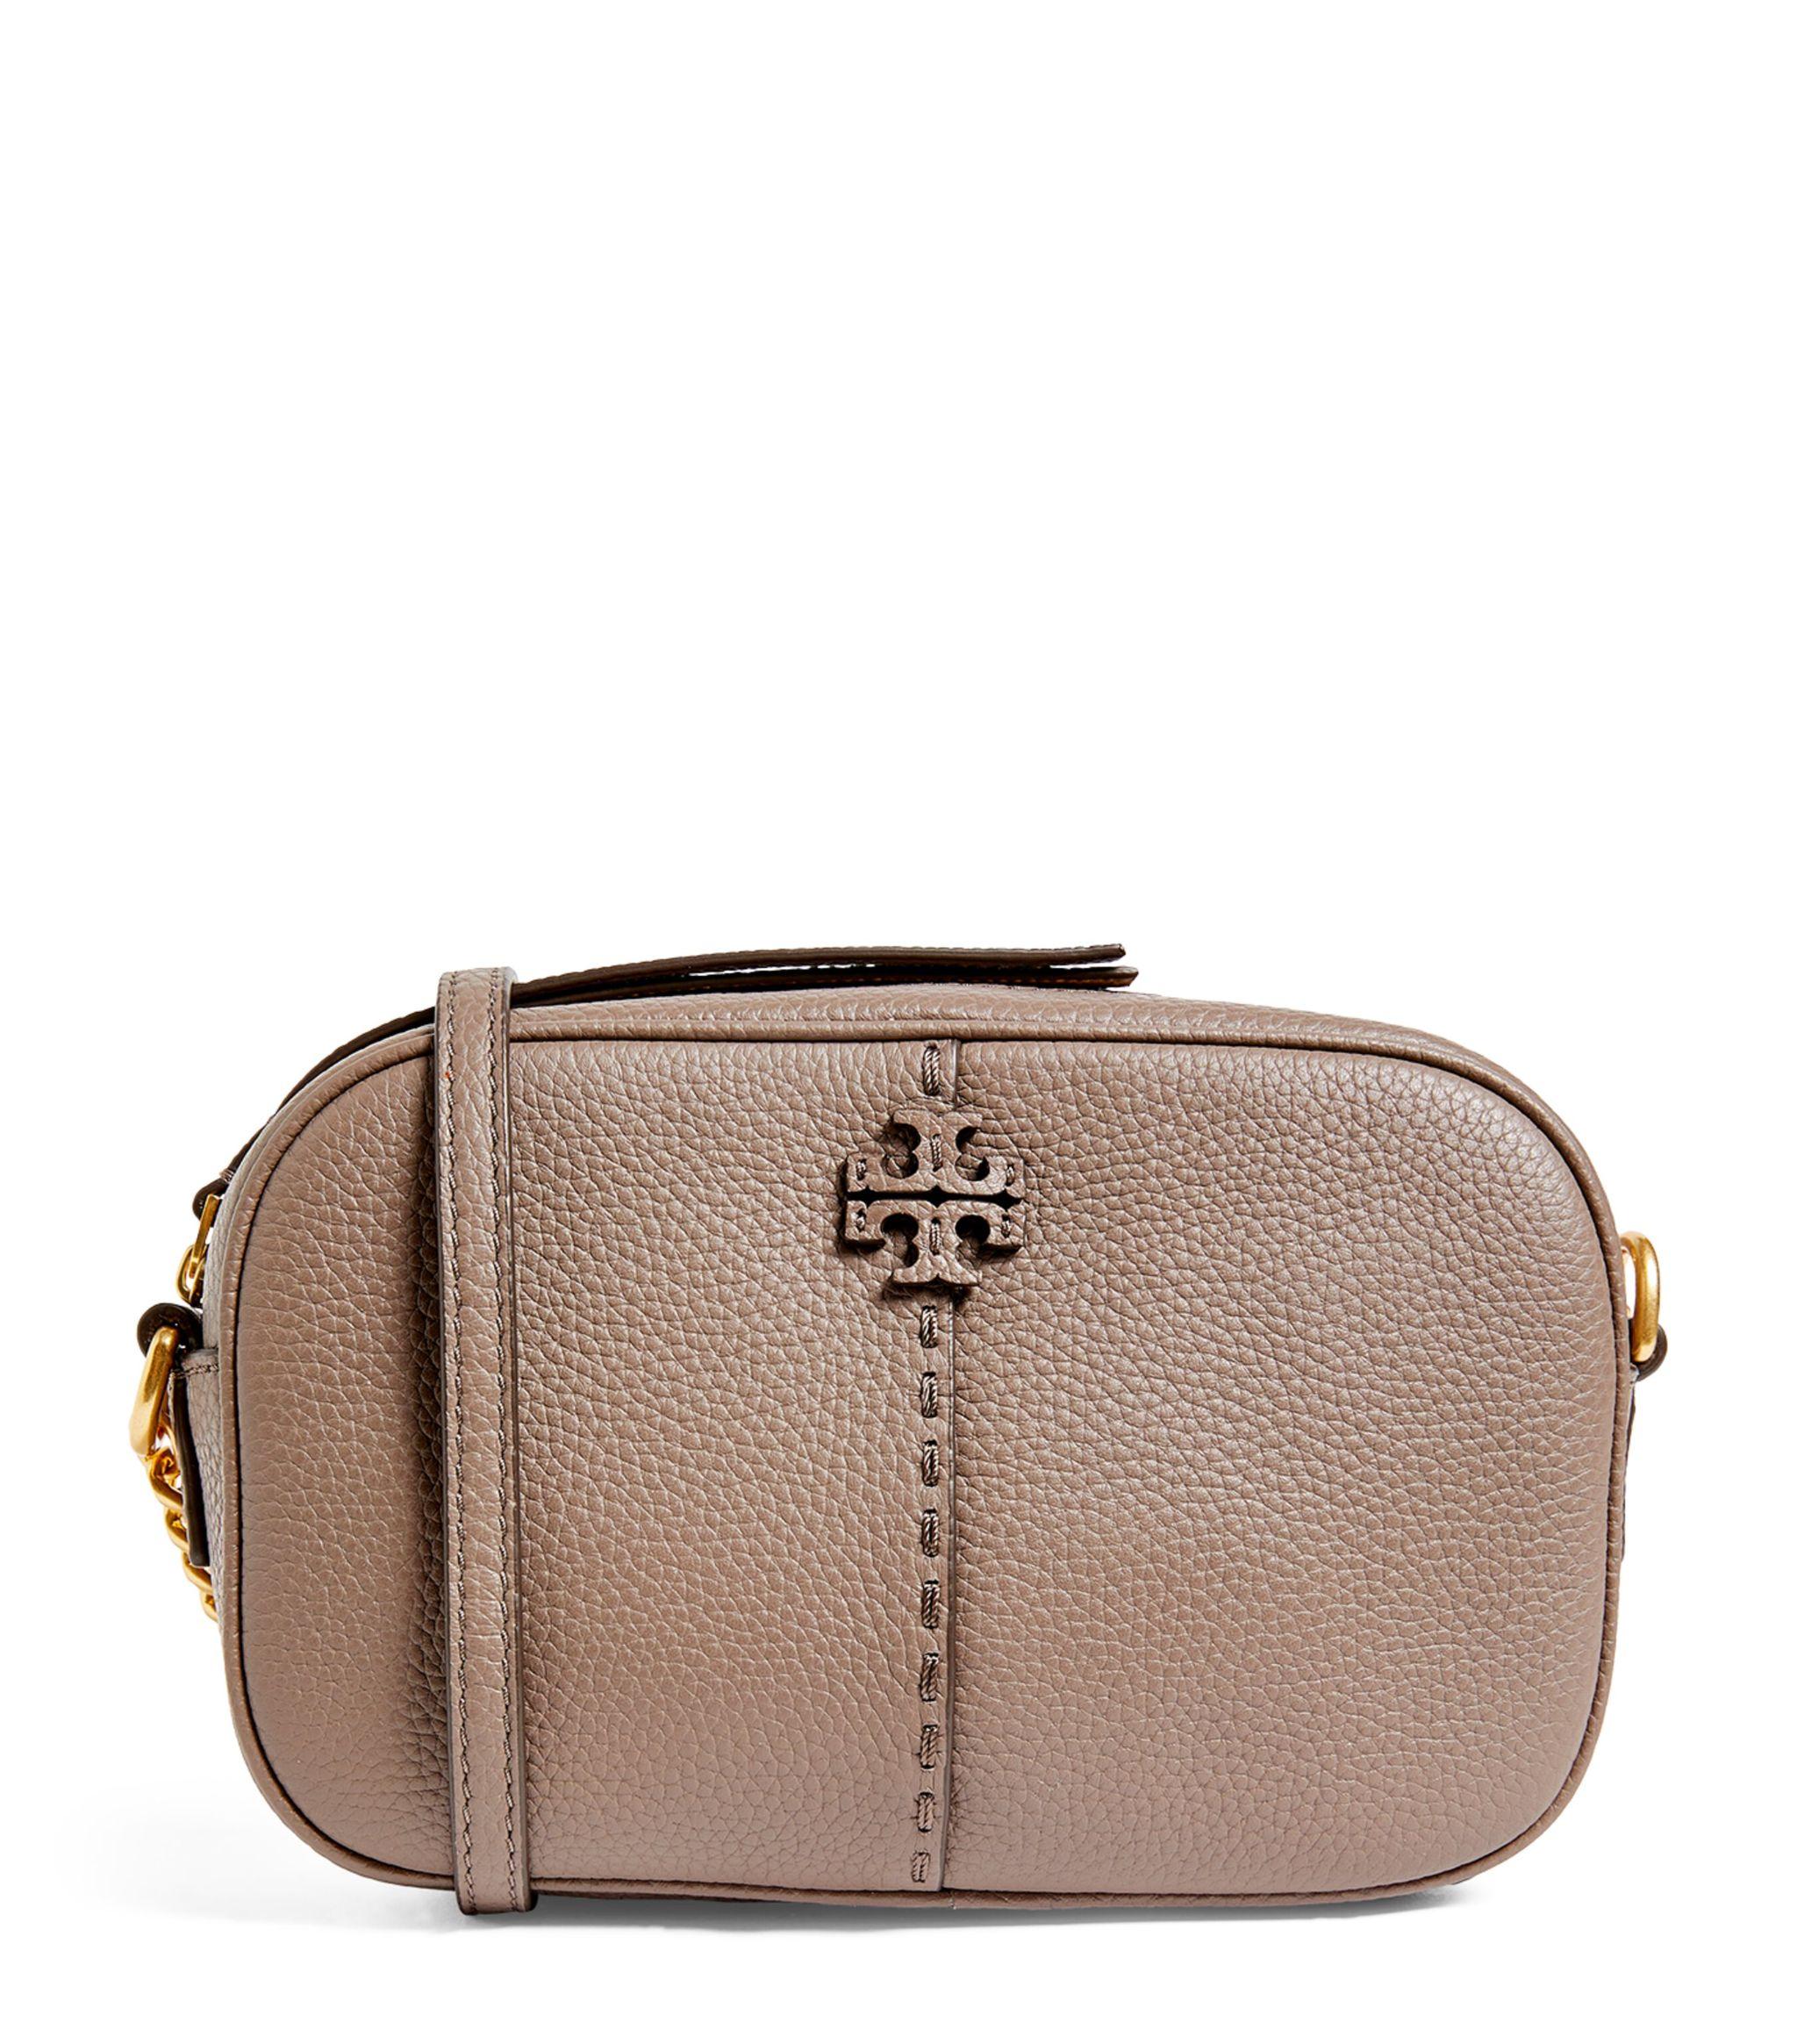 Tory Burch Leather Mcgraw Cross-body Bag in Brown | Lyst